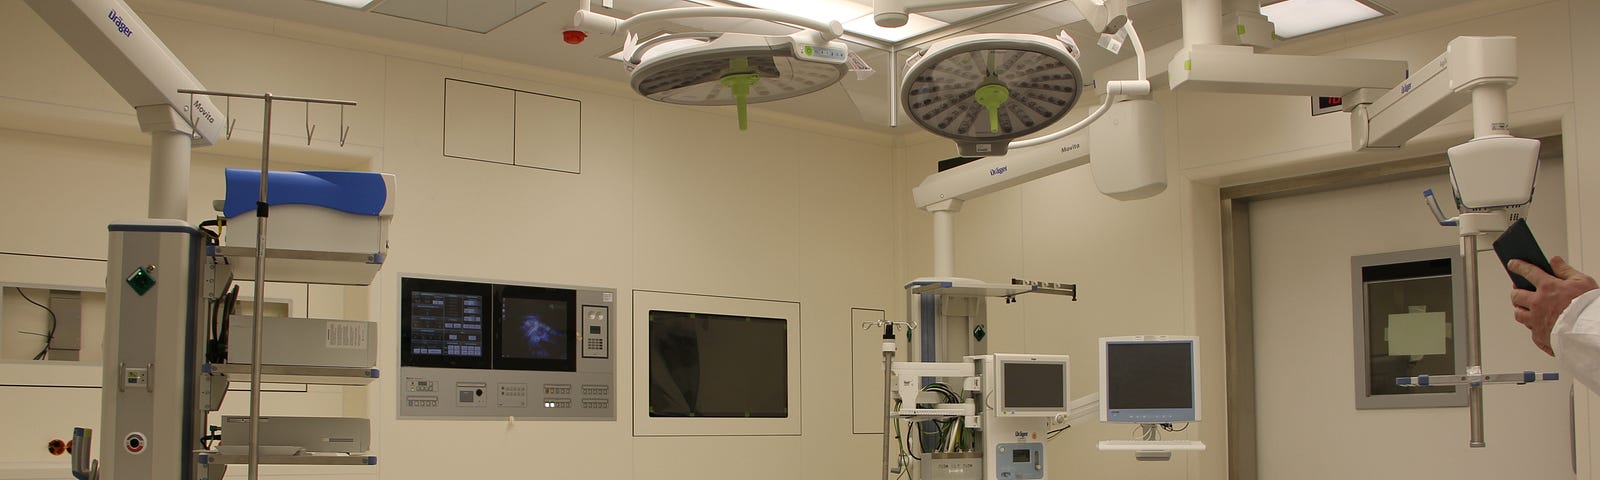 Photo of an empty hospital operating room.